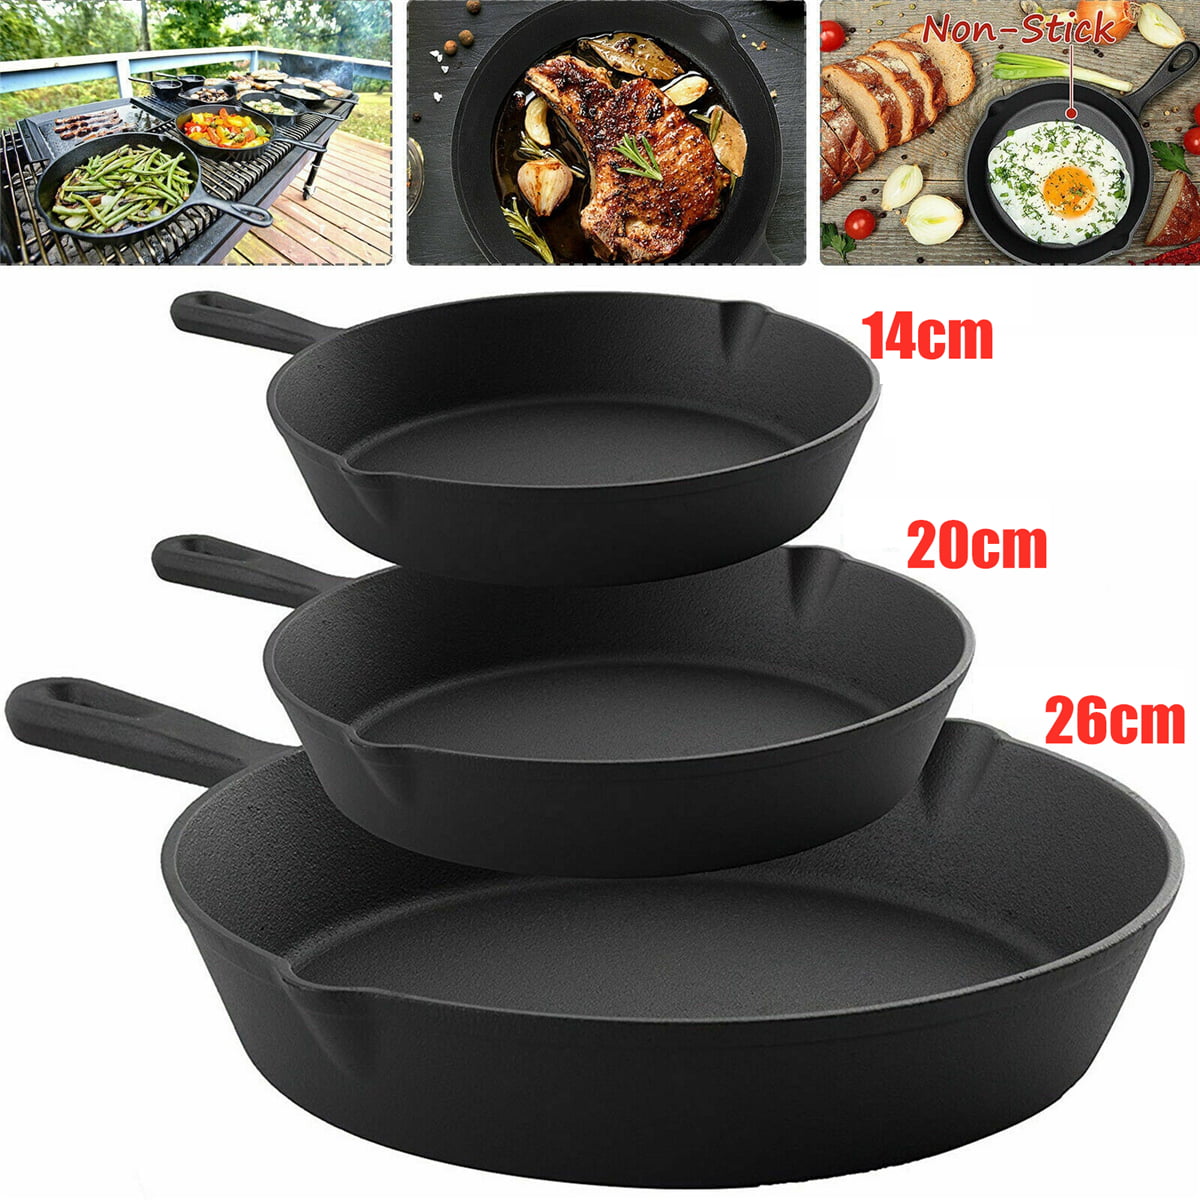 SET OF 3 CAST IRON SKILLET FRYING PAN COOKING FRYER POT GRILL FRY NON STICK BBQ